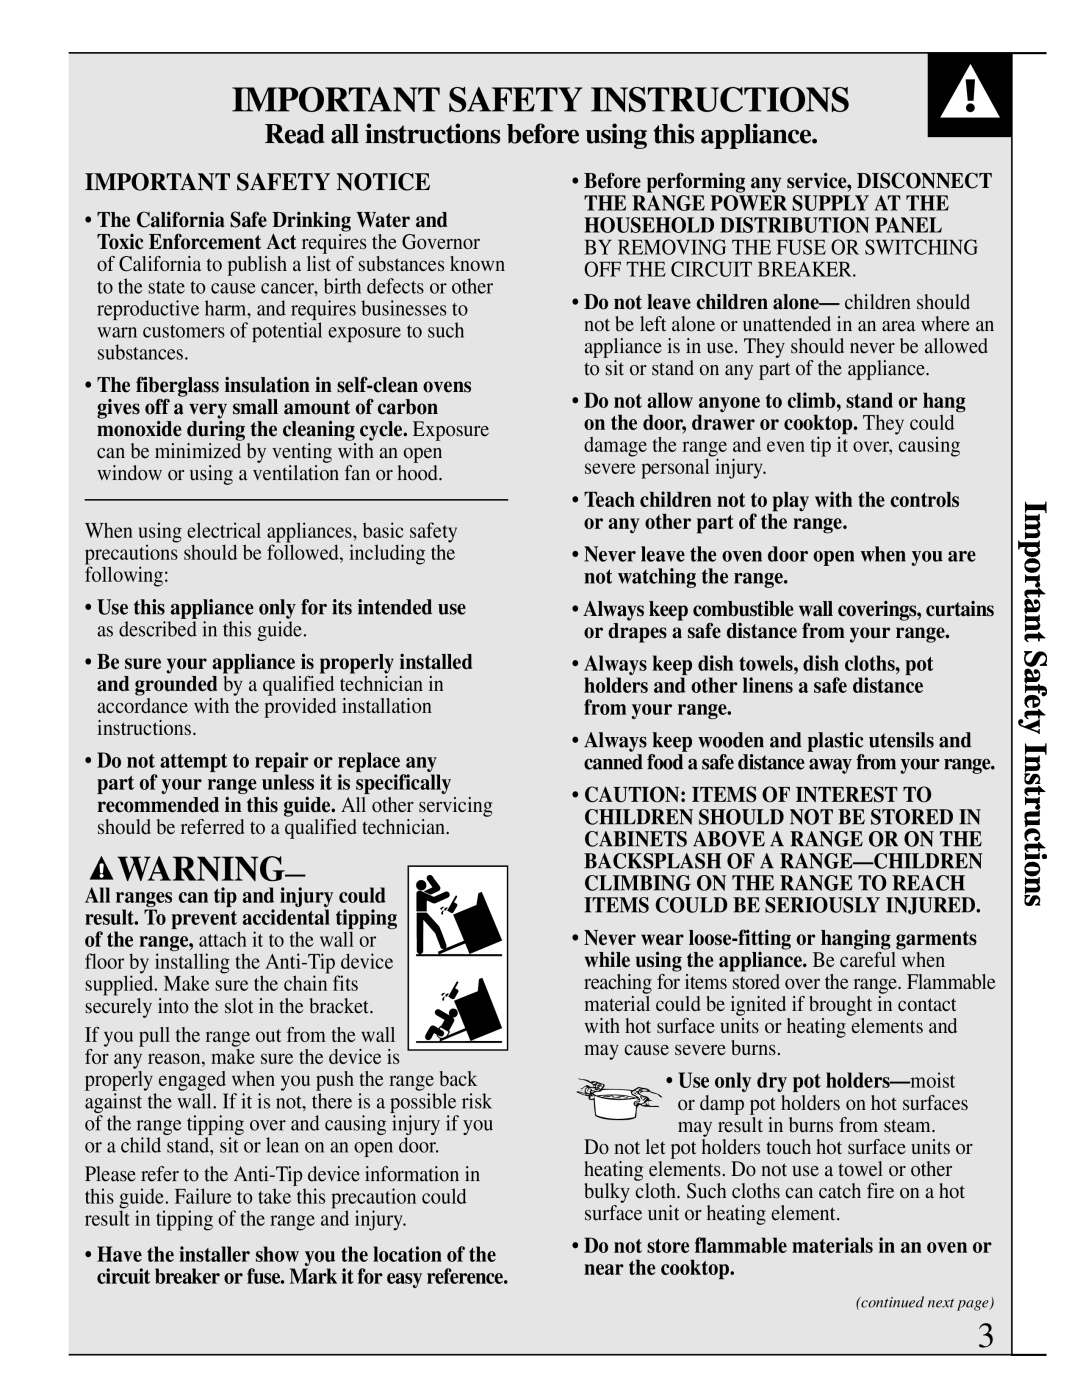 GE JSP28, JSP34 Important Safety Instructions, Read all instructions before using this appliance, Important Safety Notice 